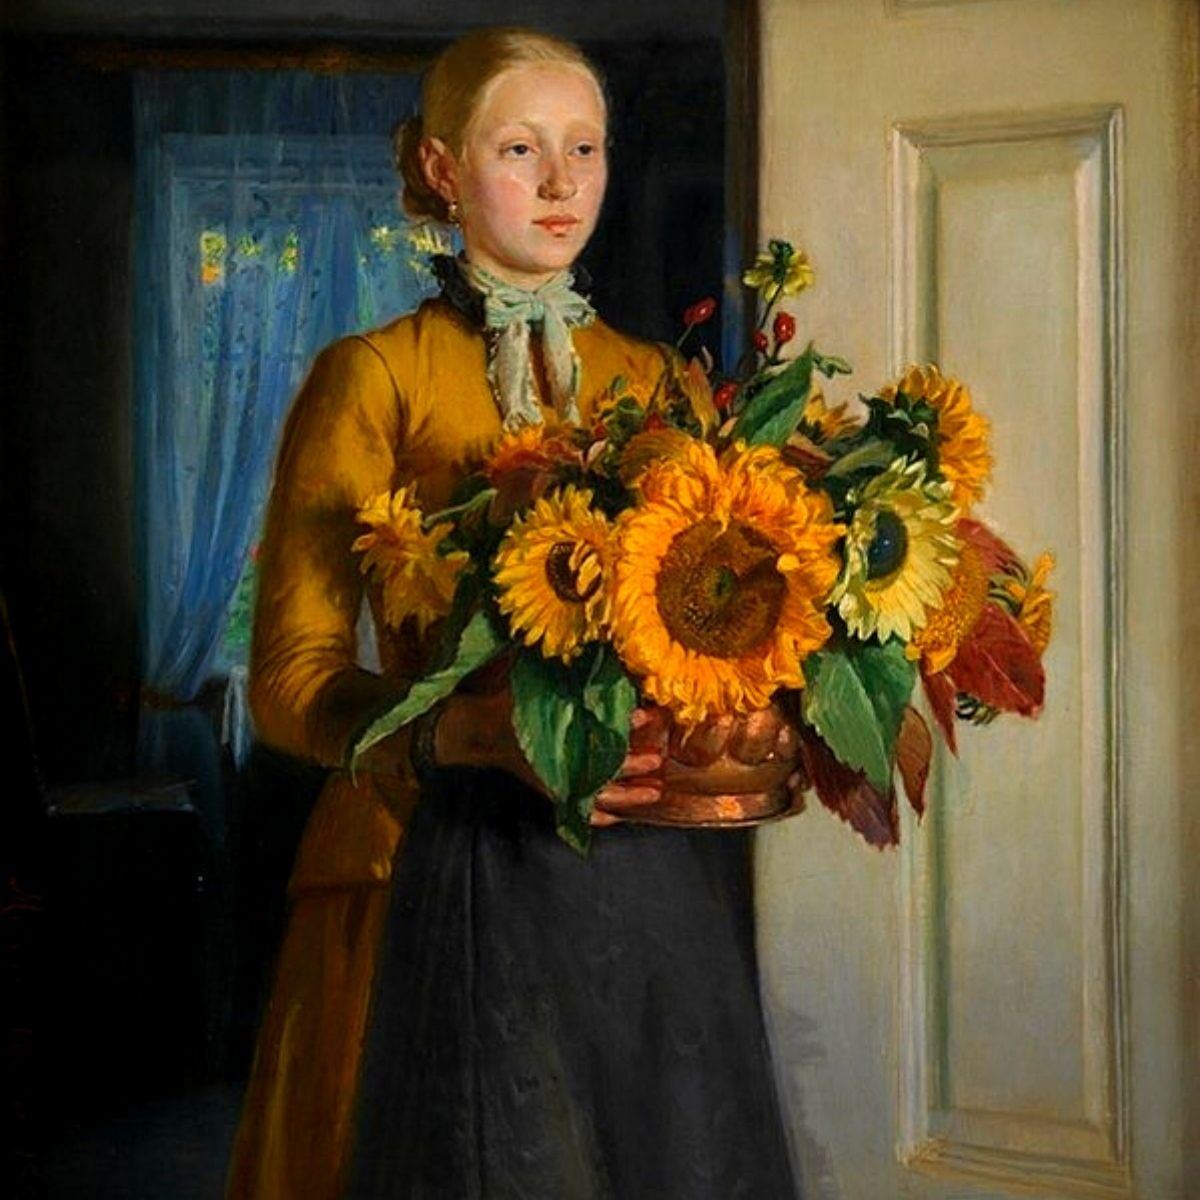 Depiction of Flowers in Art and Paintings